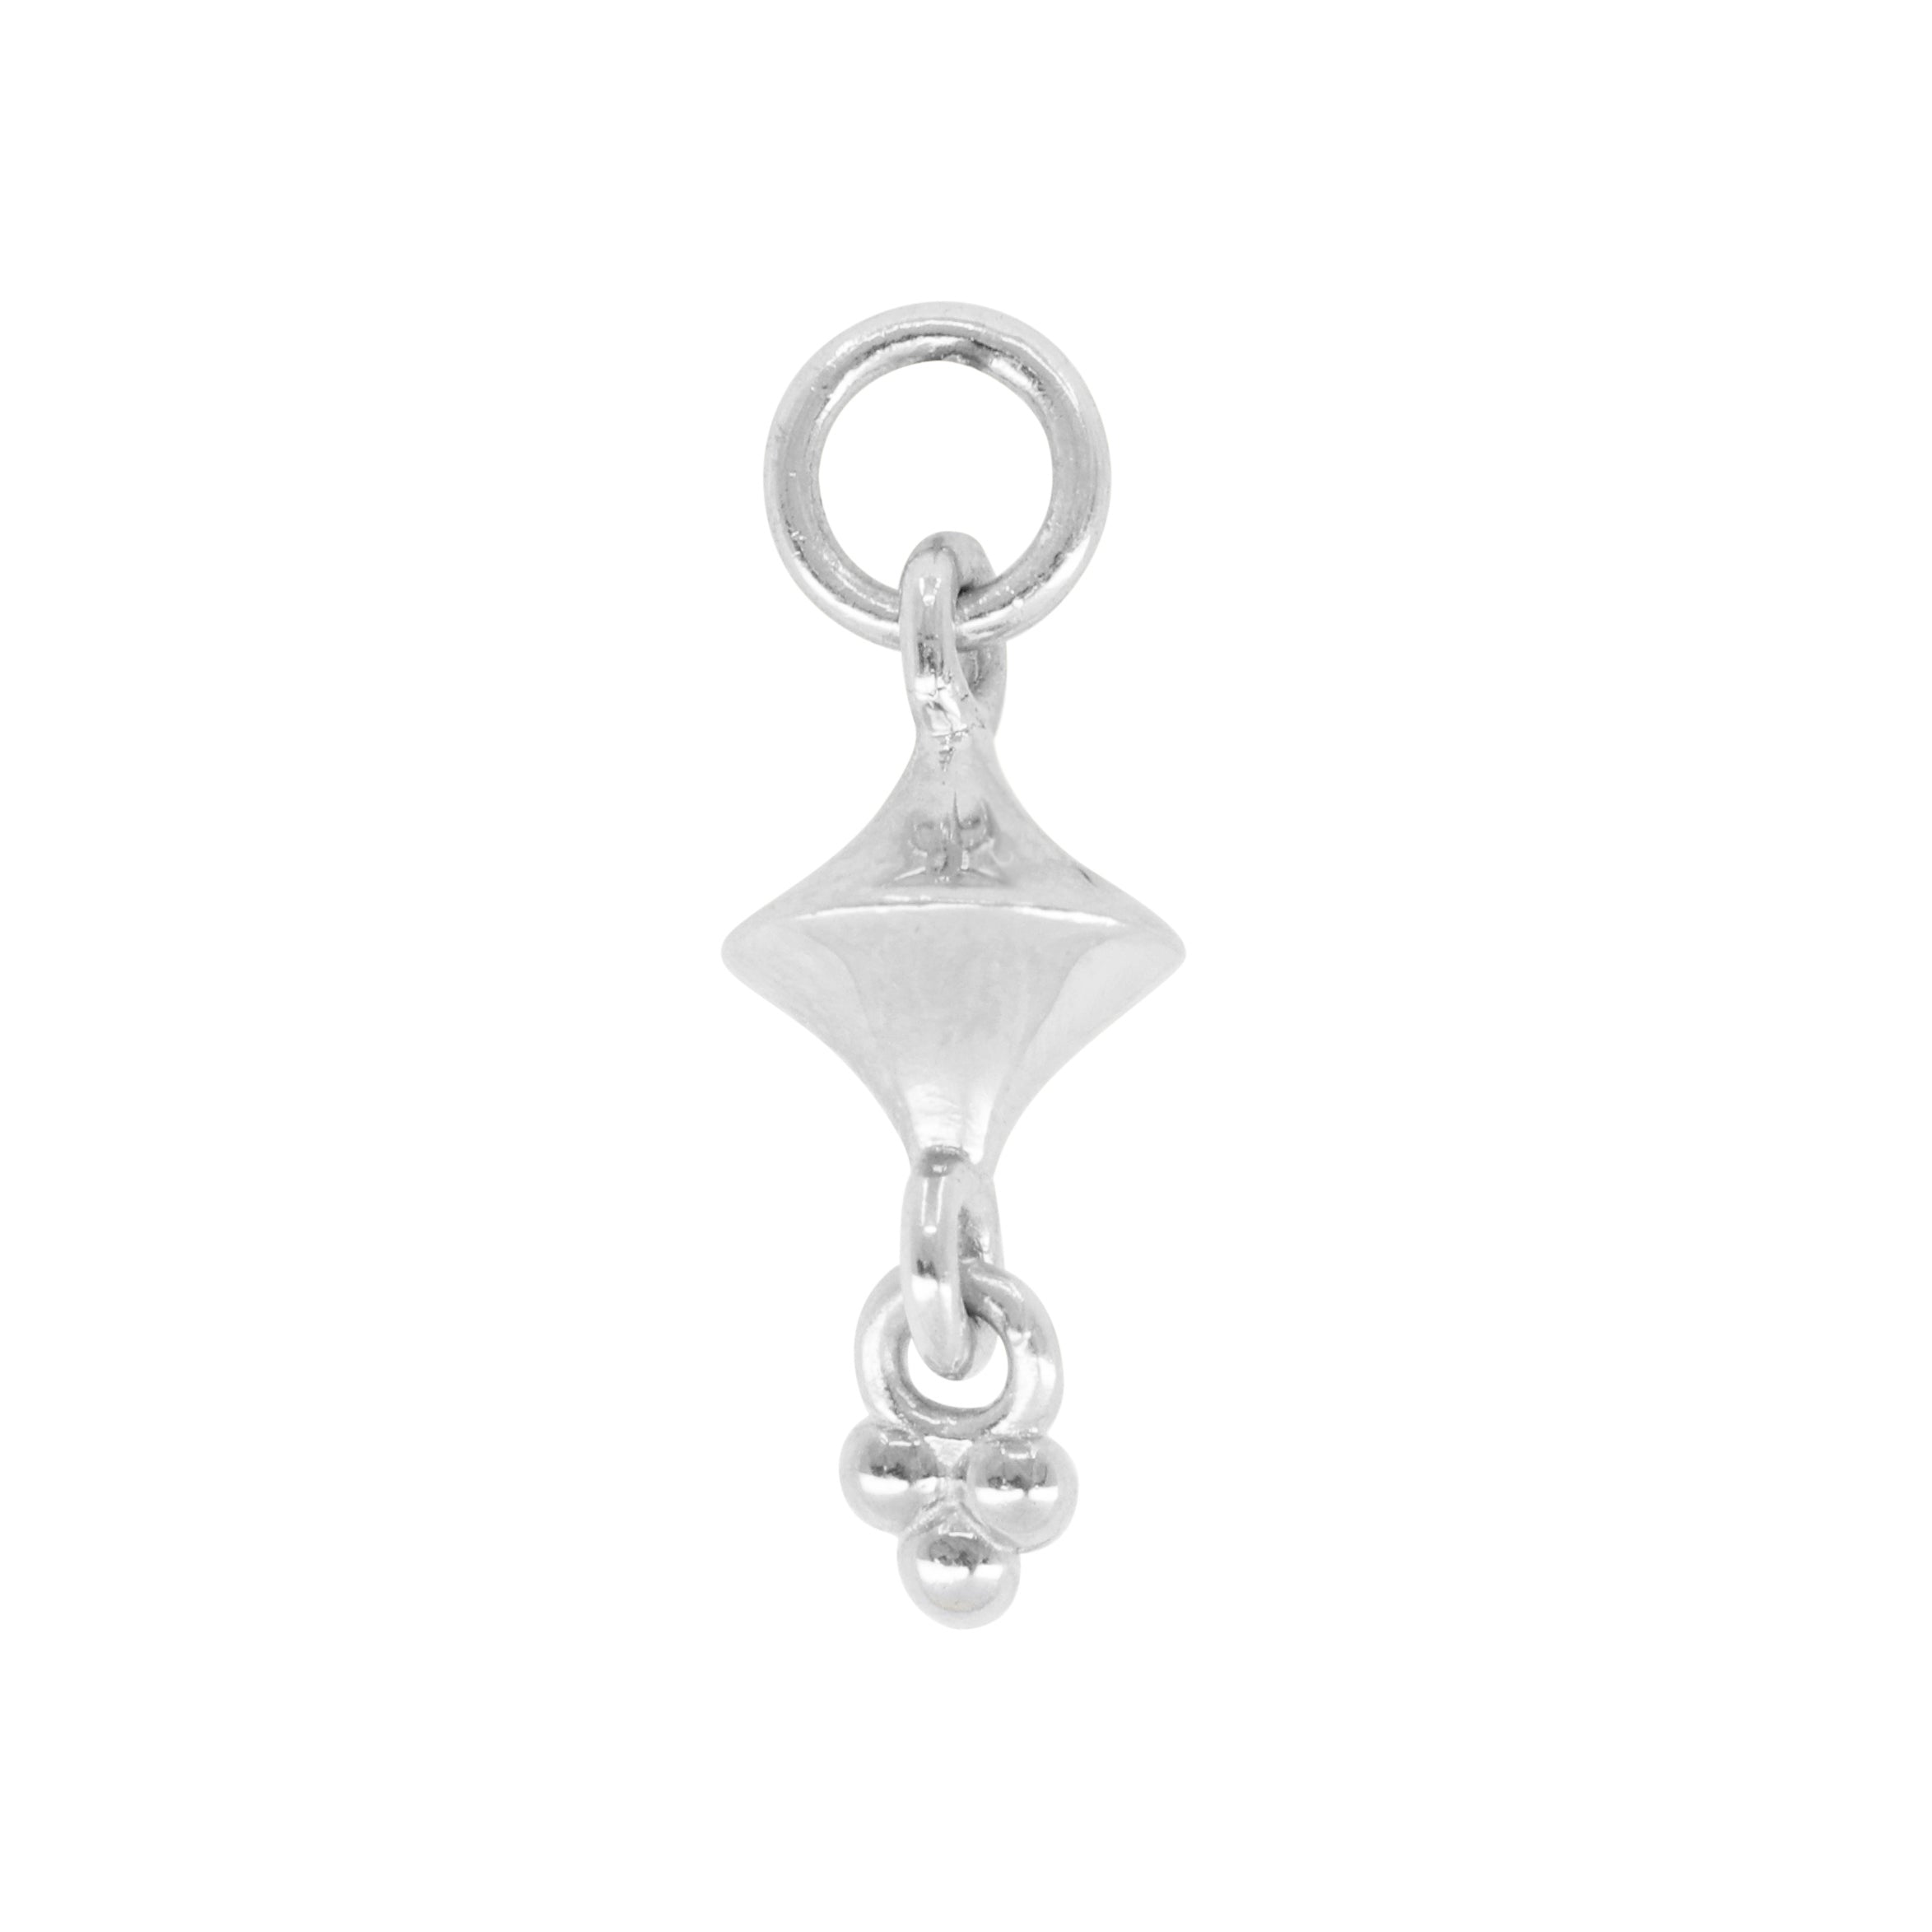 Chimed Silver Charm